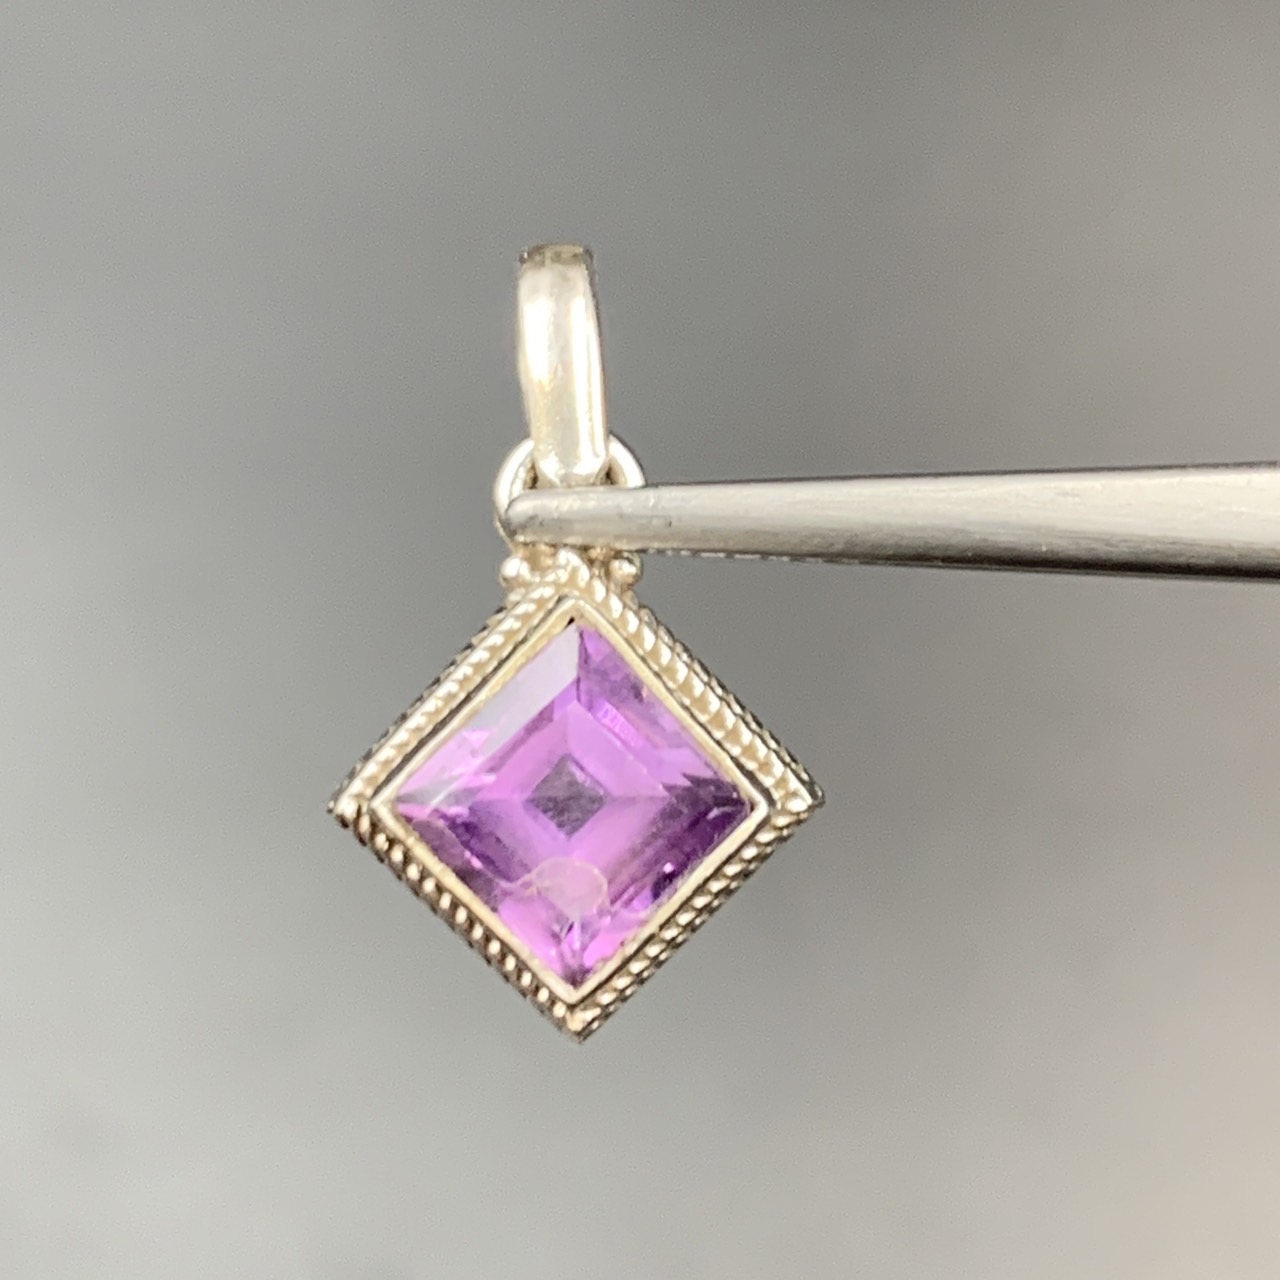 Natural Amethyst With Silver Pendant - Image 4 of 4